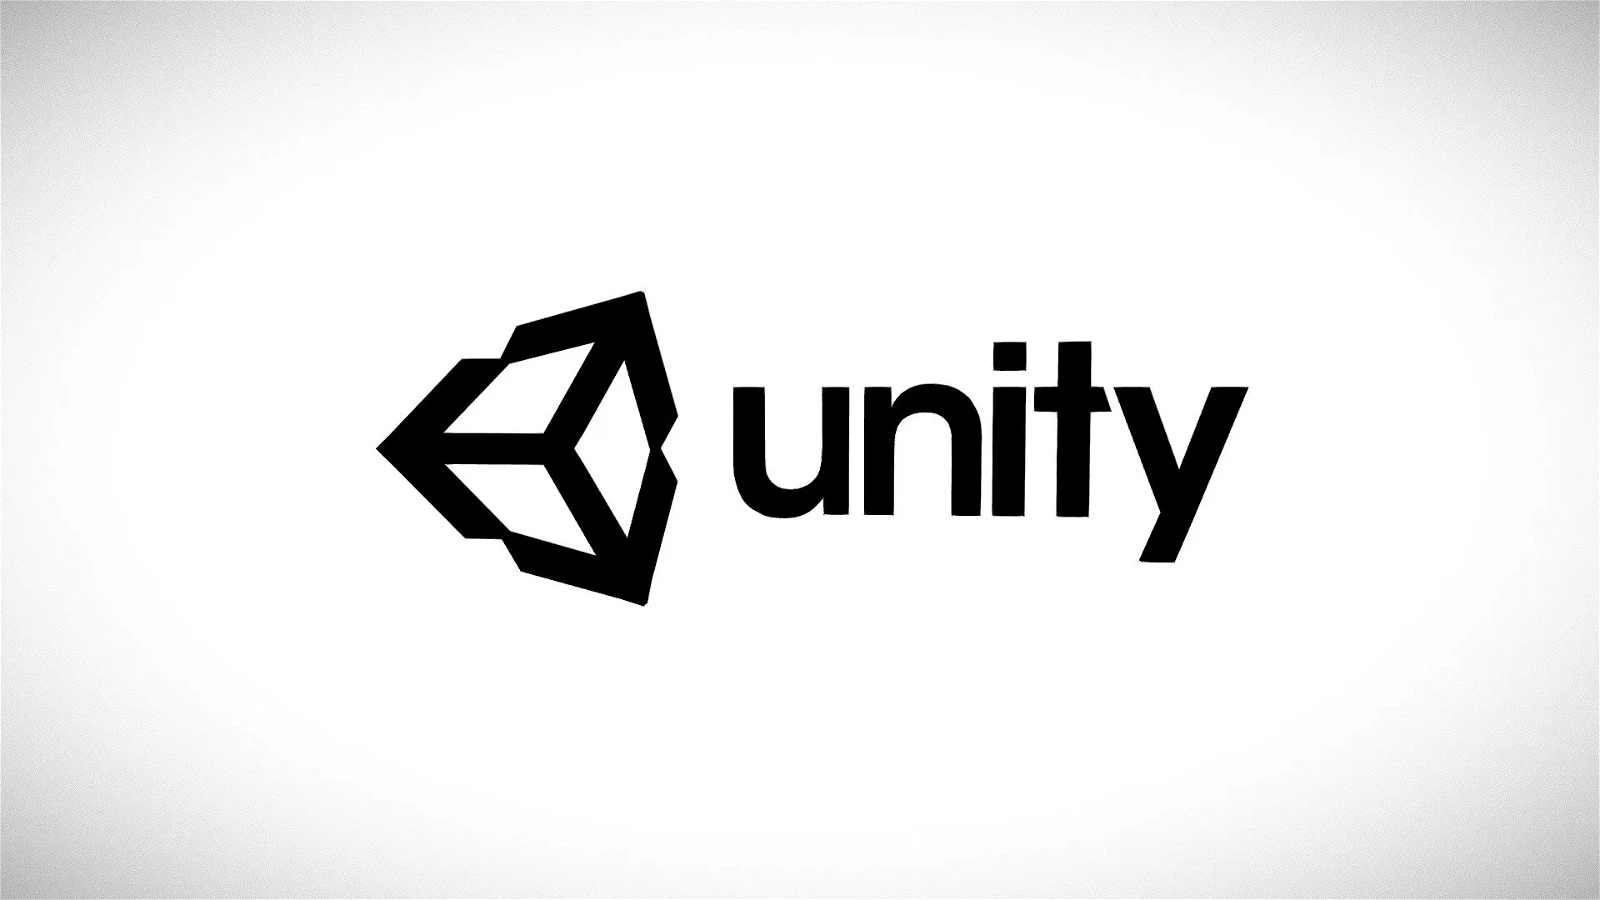 Unity finally clarifies its stance on its game engine charges announcement after extreme backlash from developers.